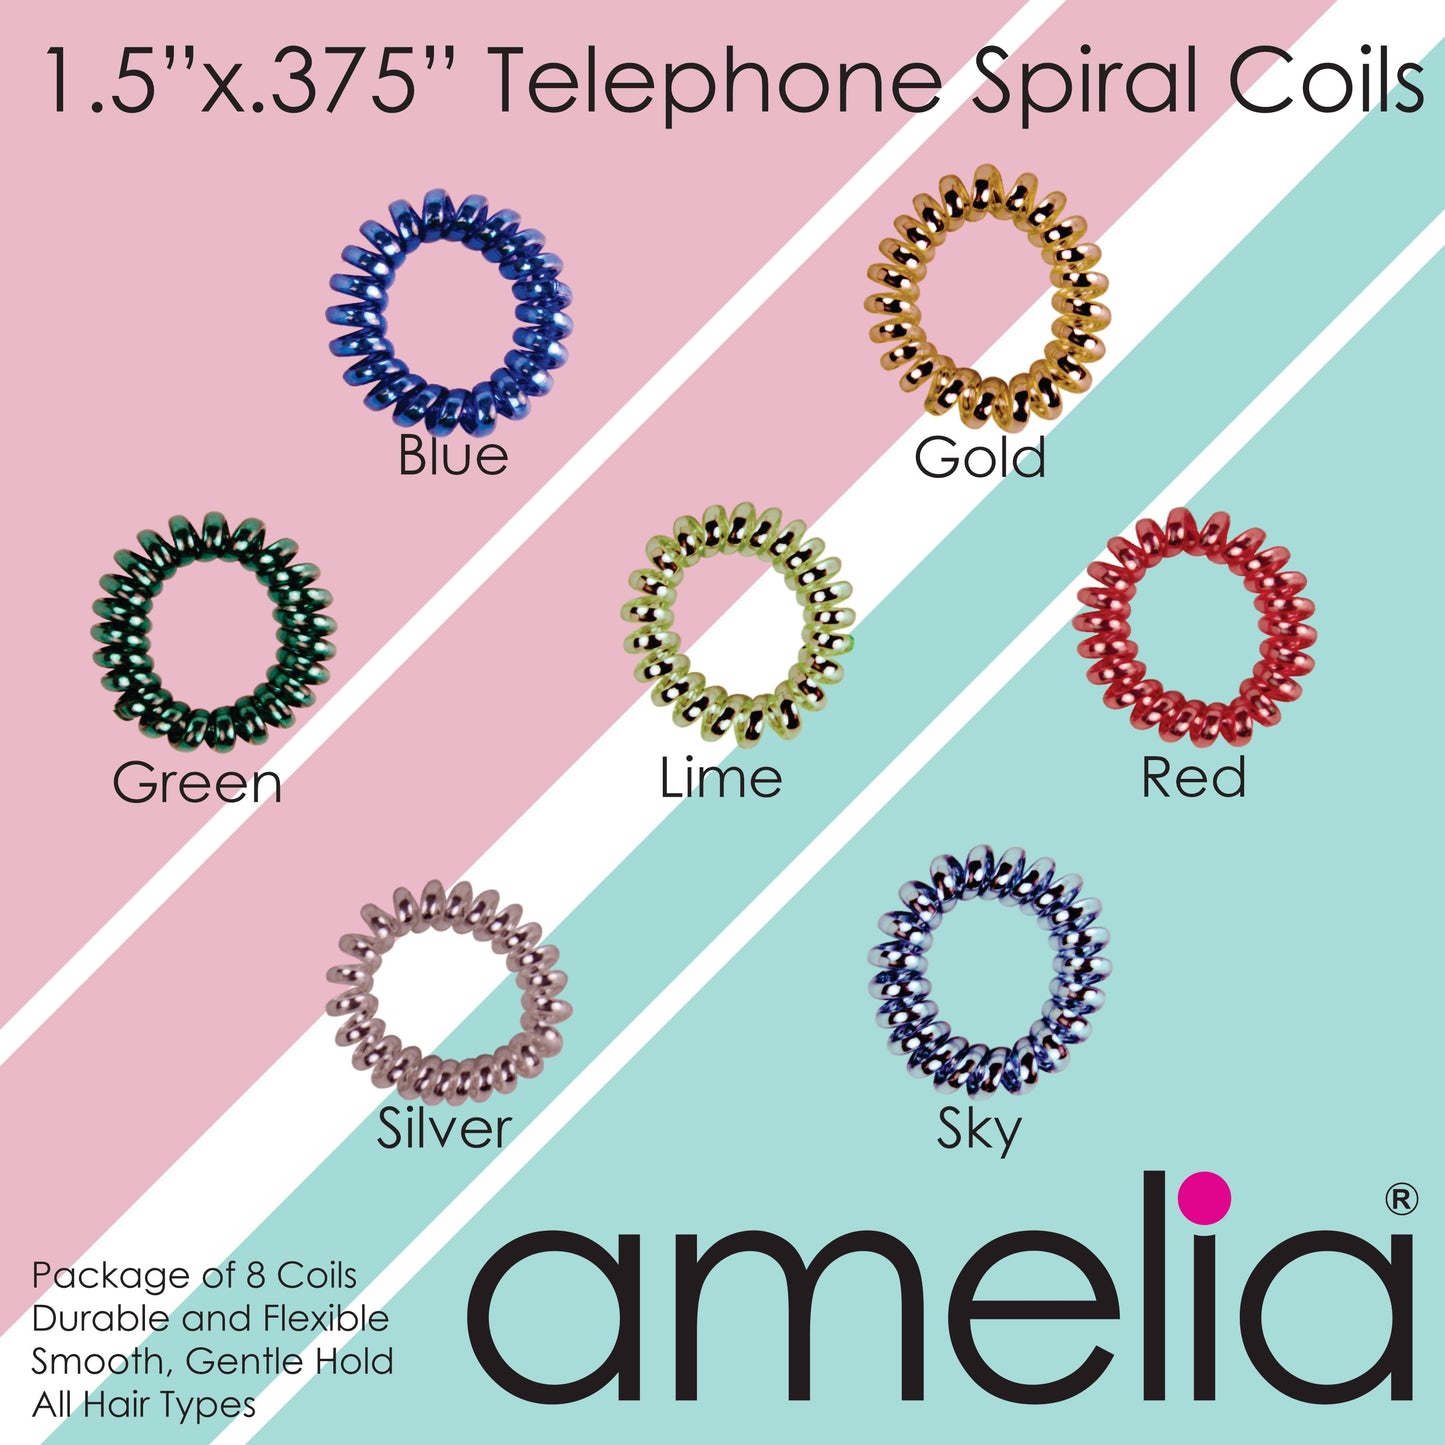 Amelia Beauty, 8 Small Shinny Elastic Hair Telephone Cord Coils, 1.5in Diameter Spiral Hair Ties, Strong Hold, Gentle on Hair, Silver